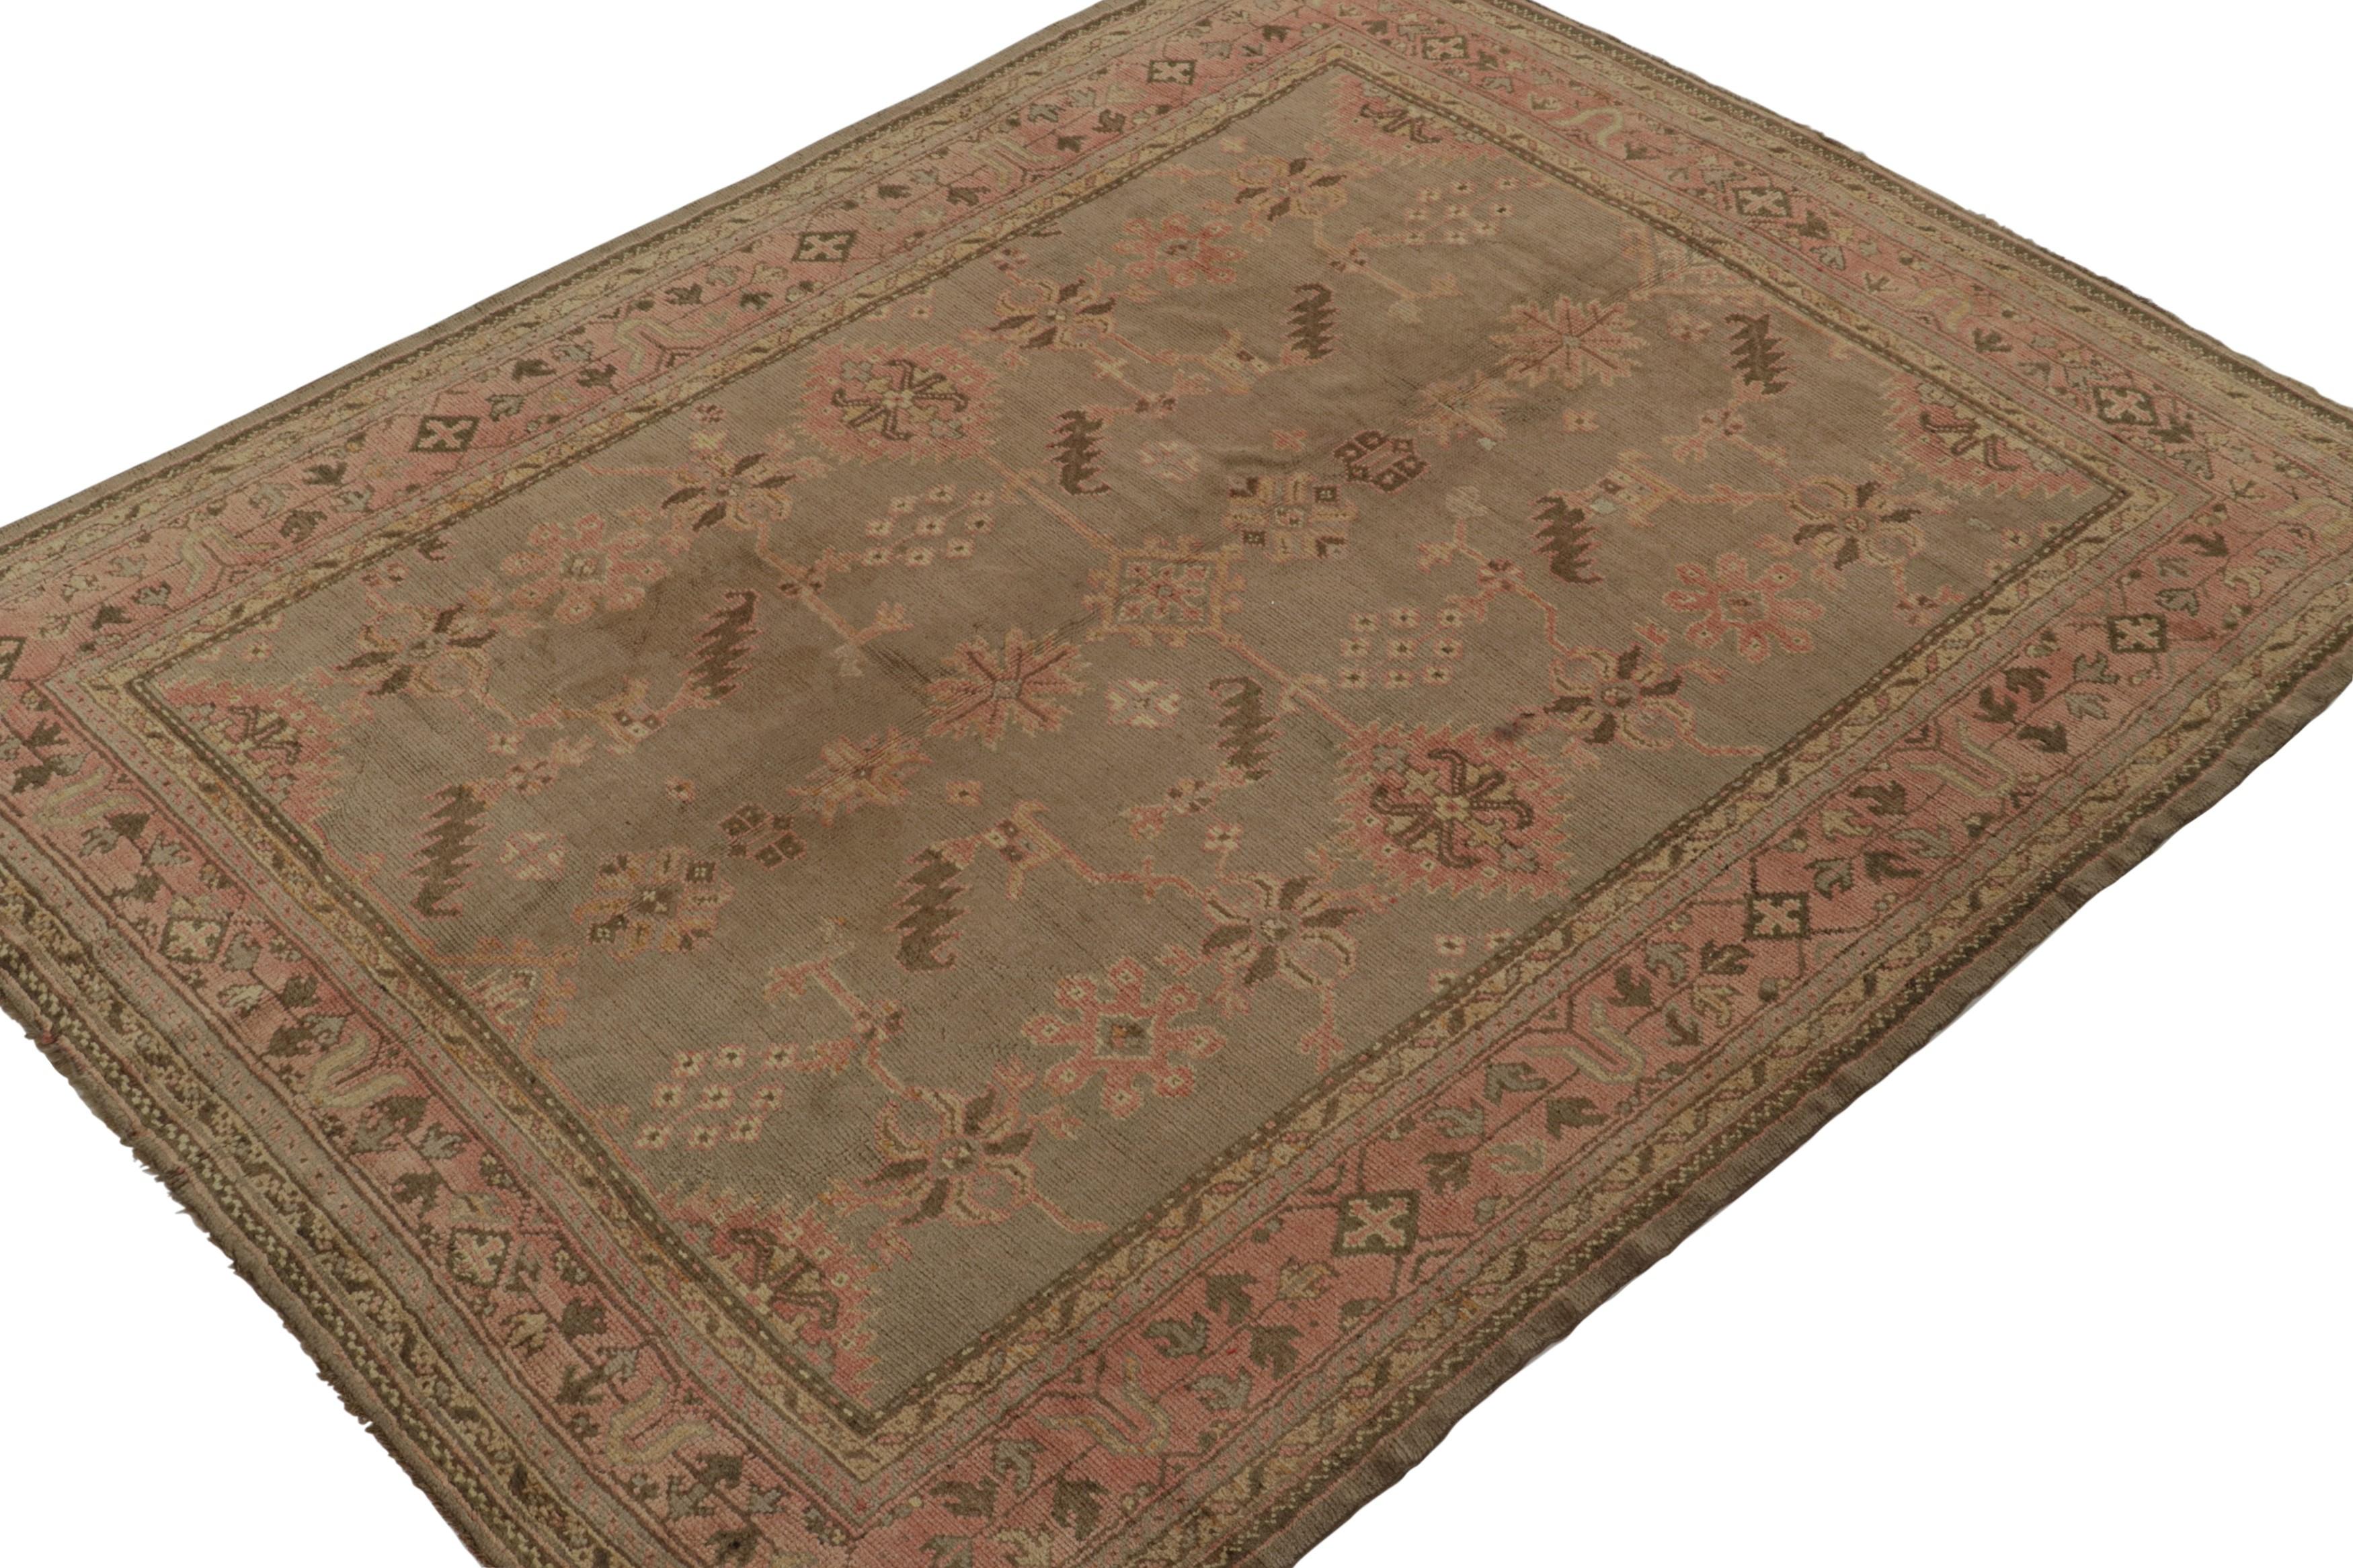 Hand-Knotted Vintage Oushak Rug with Beige-Brown and Pink Floral Patterns, from Rug & Kilim For Sale